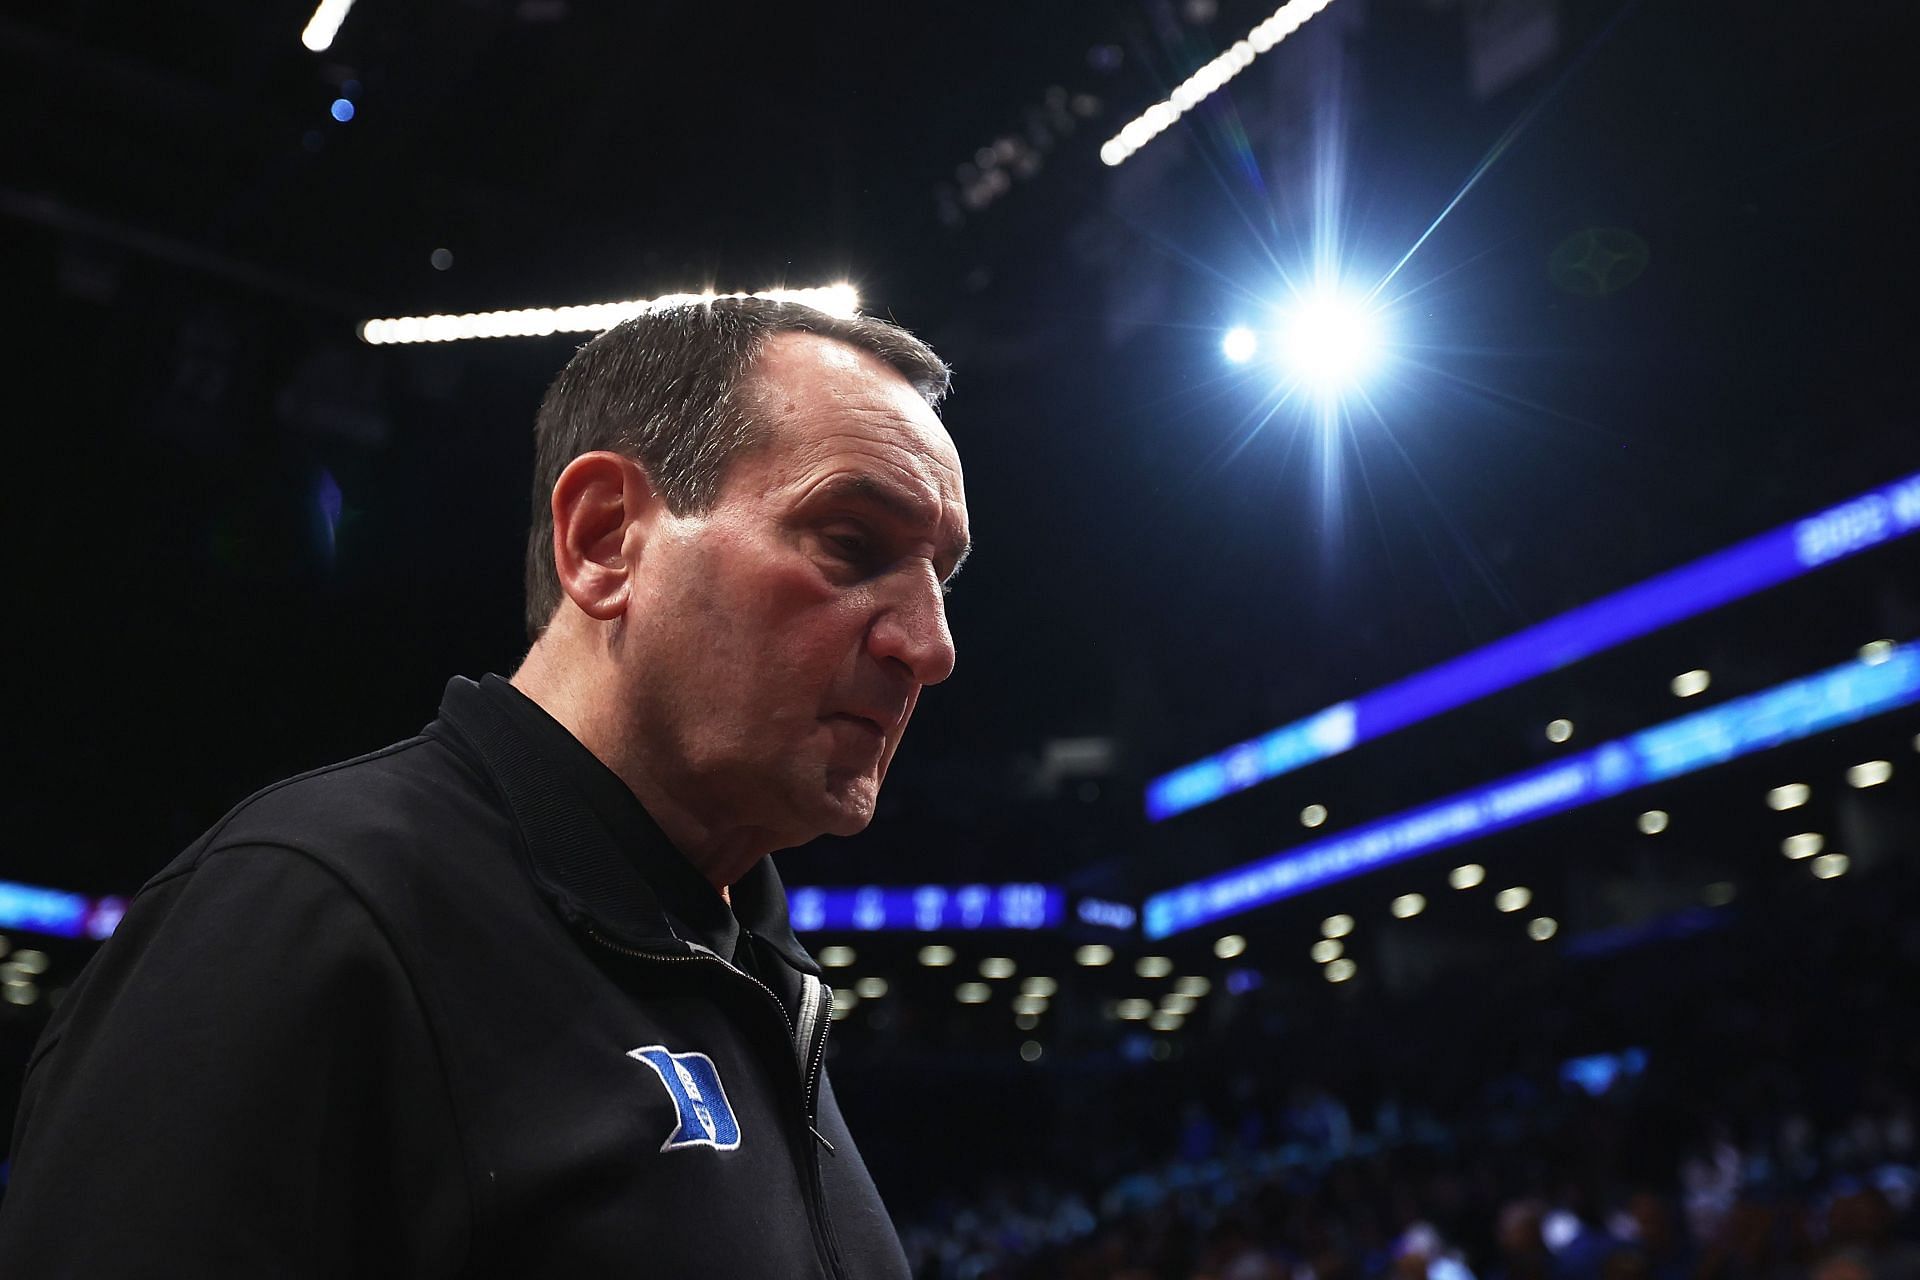 The spotlight is closing on the legendary Mike Krzyzewski and rising on a new legend.